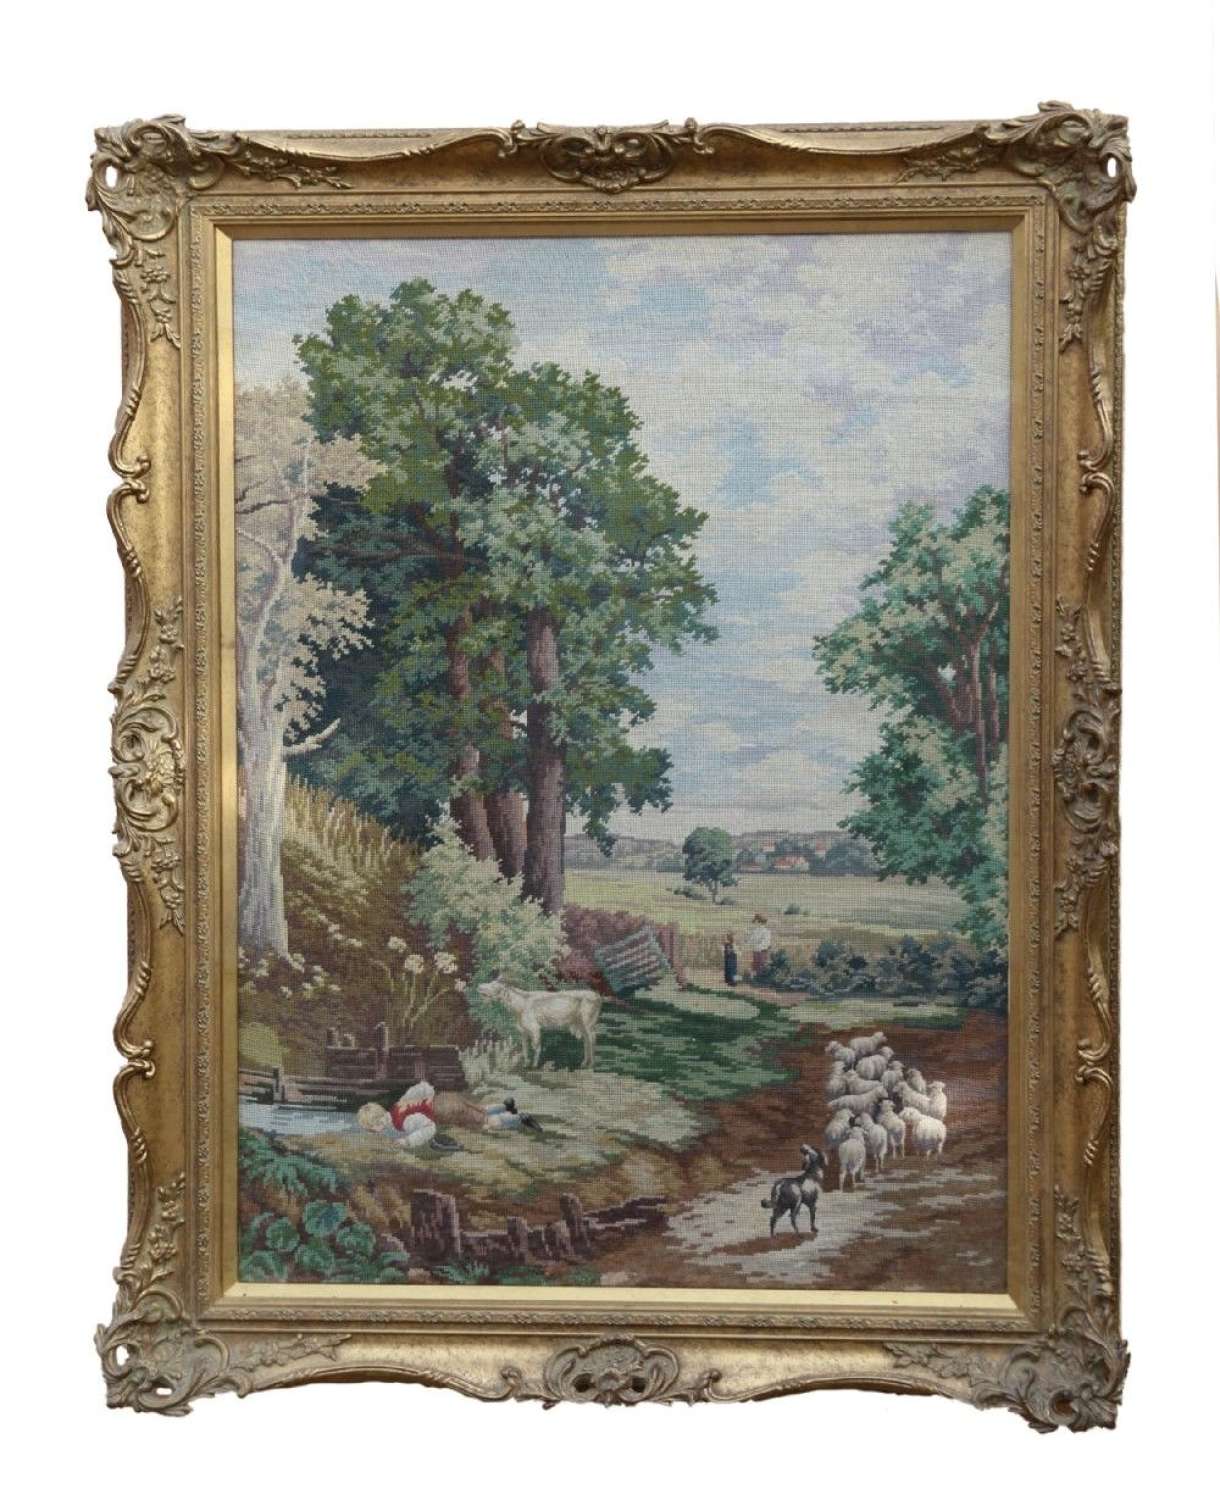 A Fabulous Late 19th C Large Wool Work Picture Taken From John Constable's Painting, The Corn Field